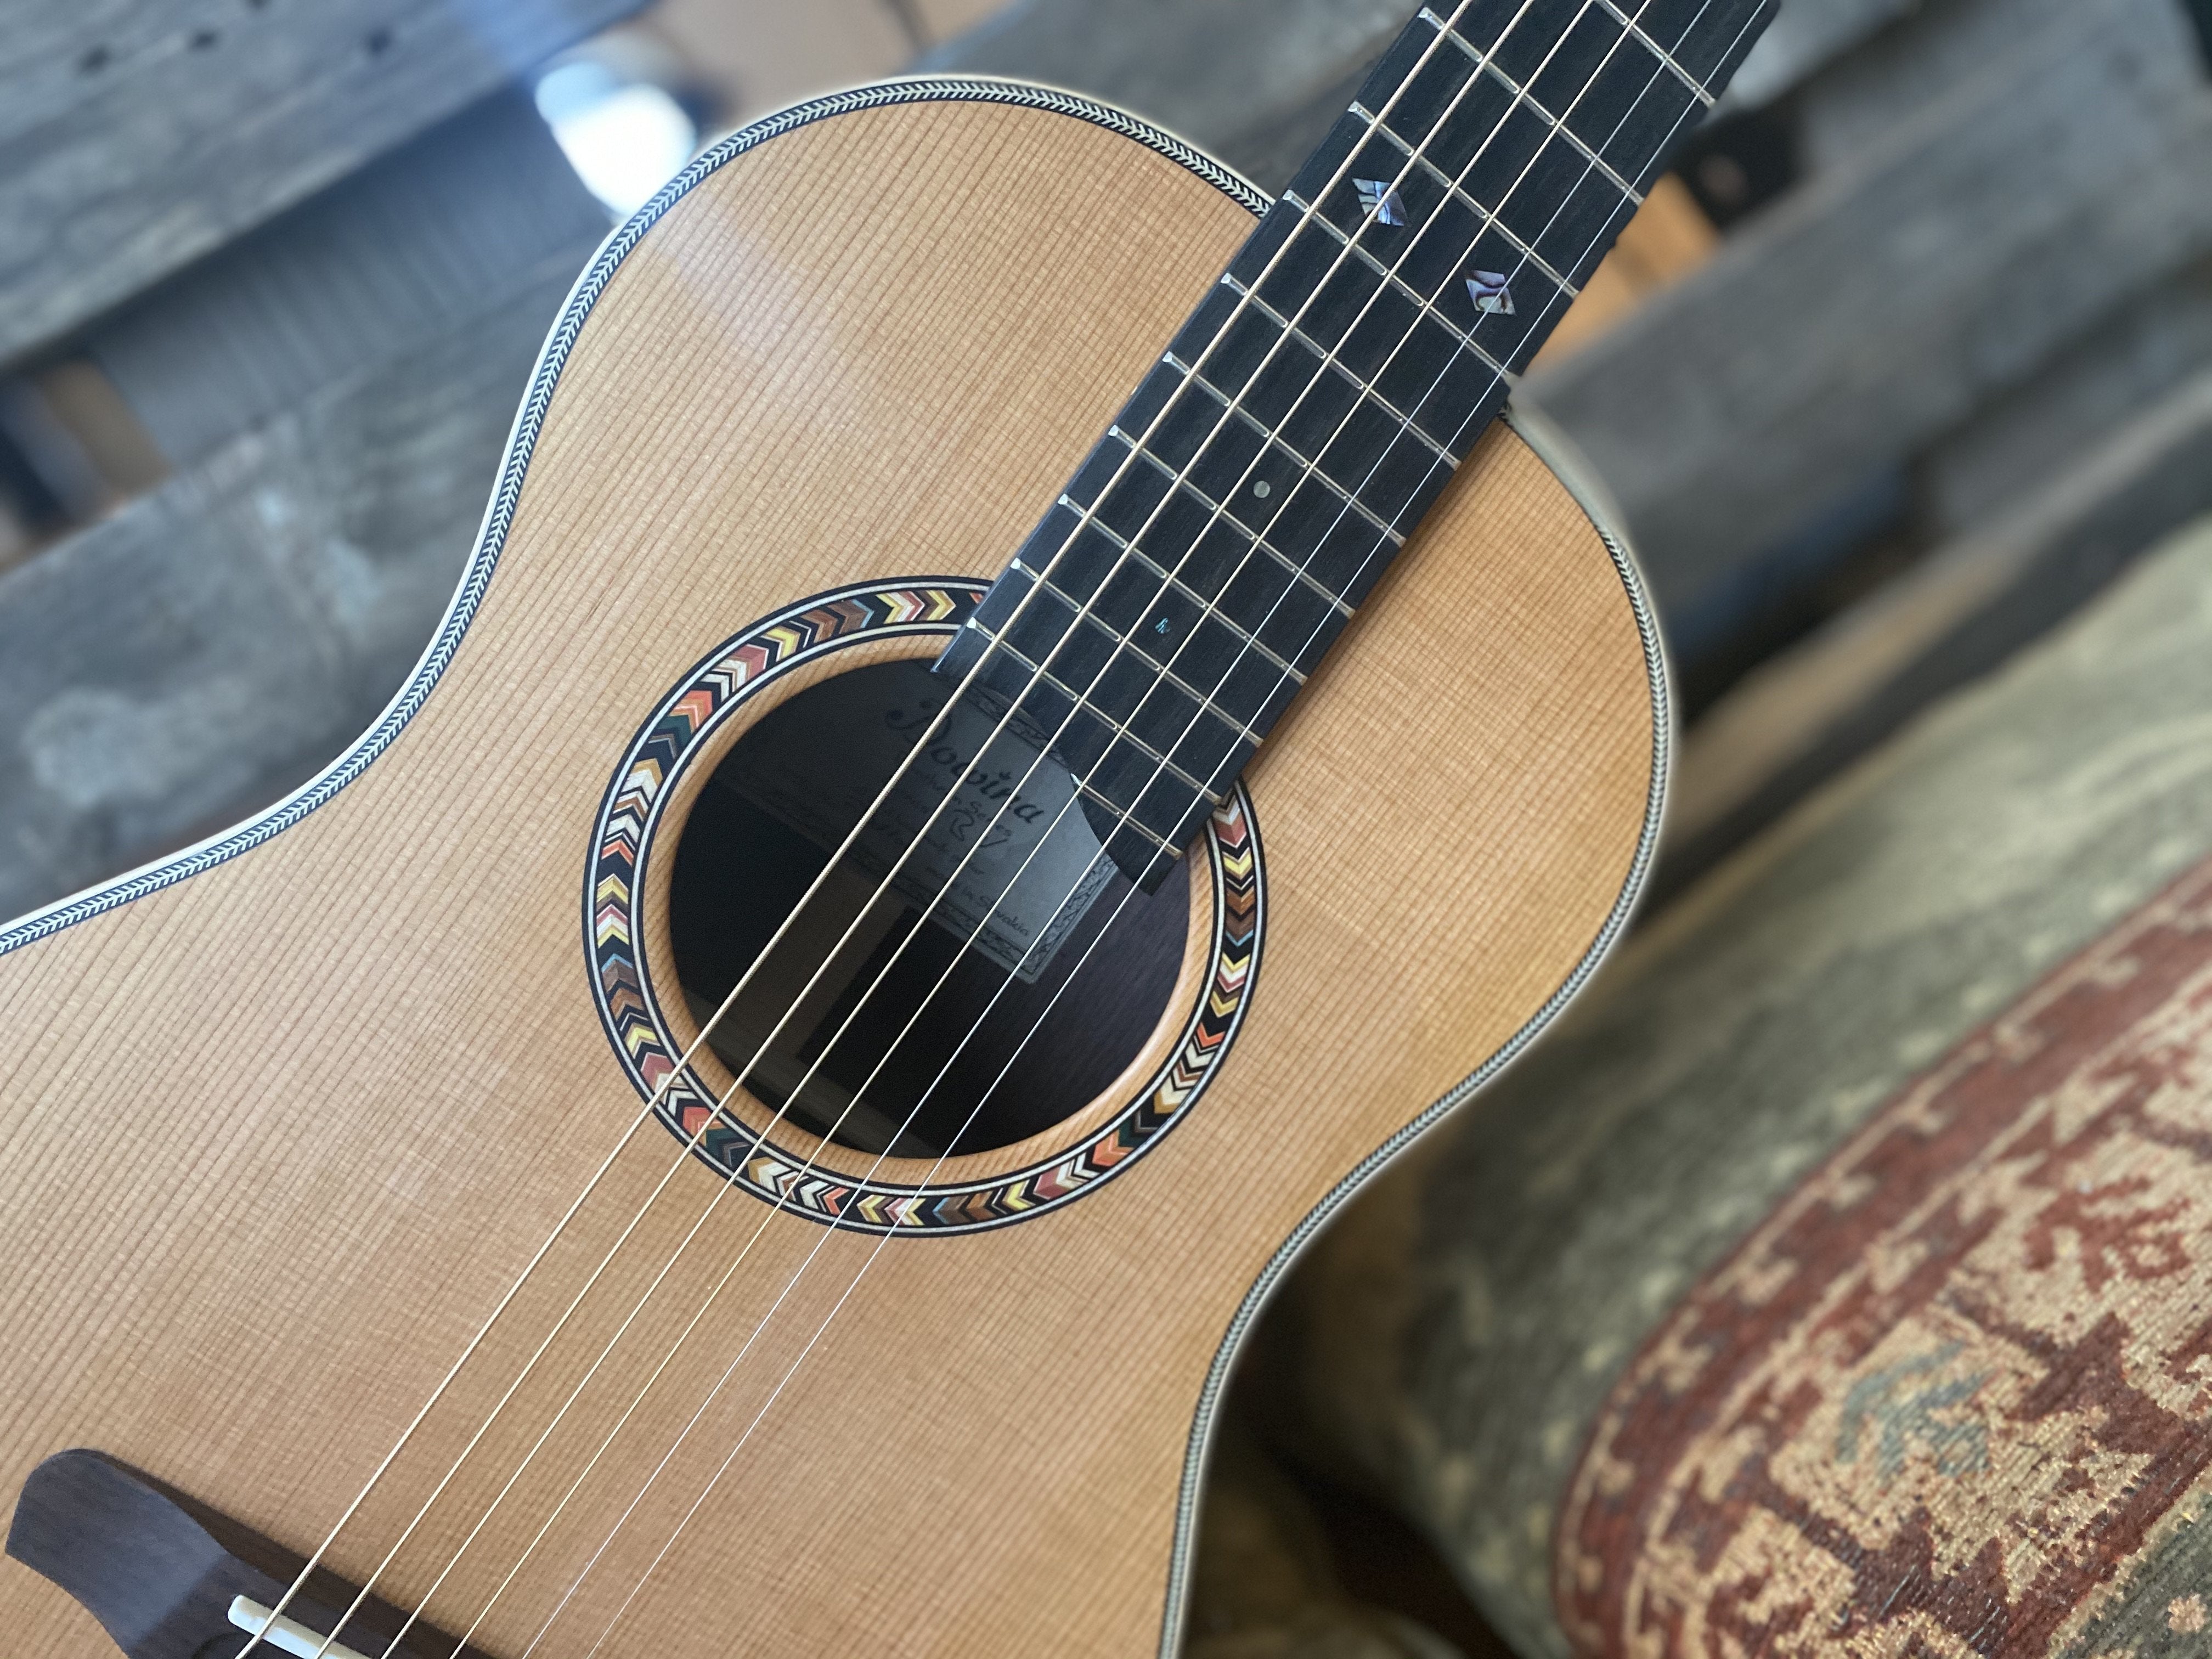 Dowina Rosewood BV, Acoustic Guitar for sale at Richards Guitars.